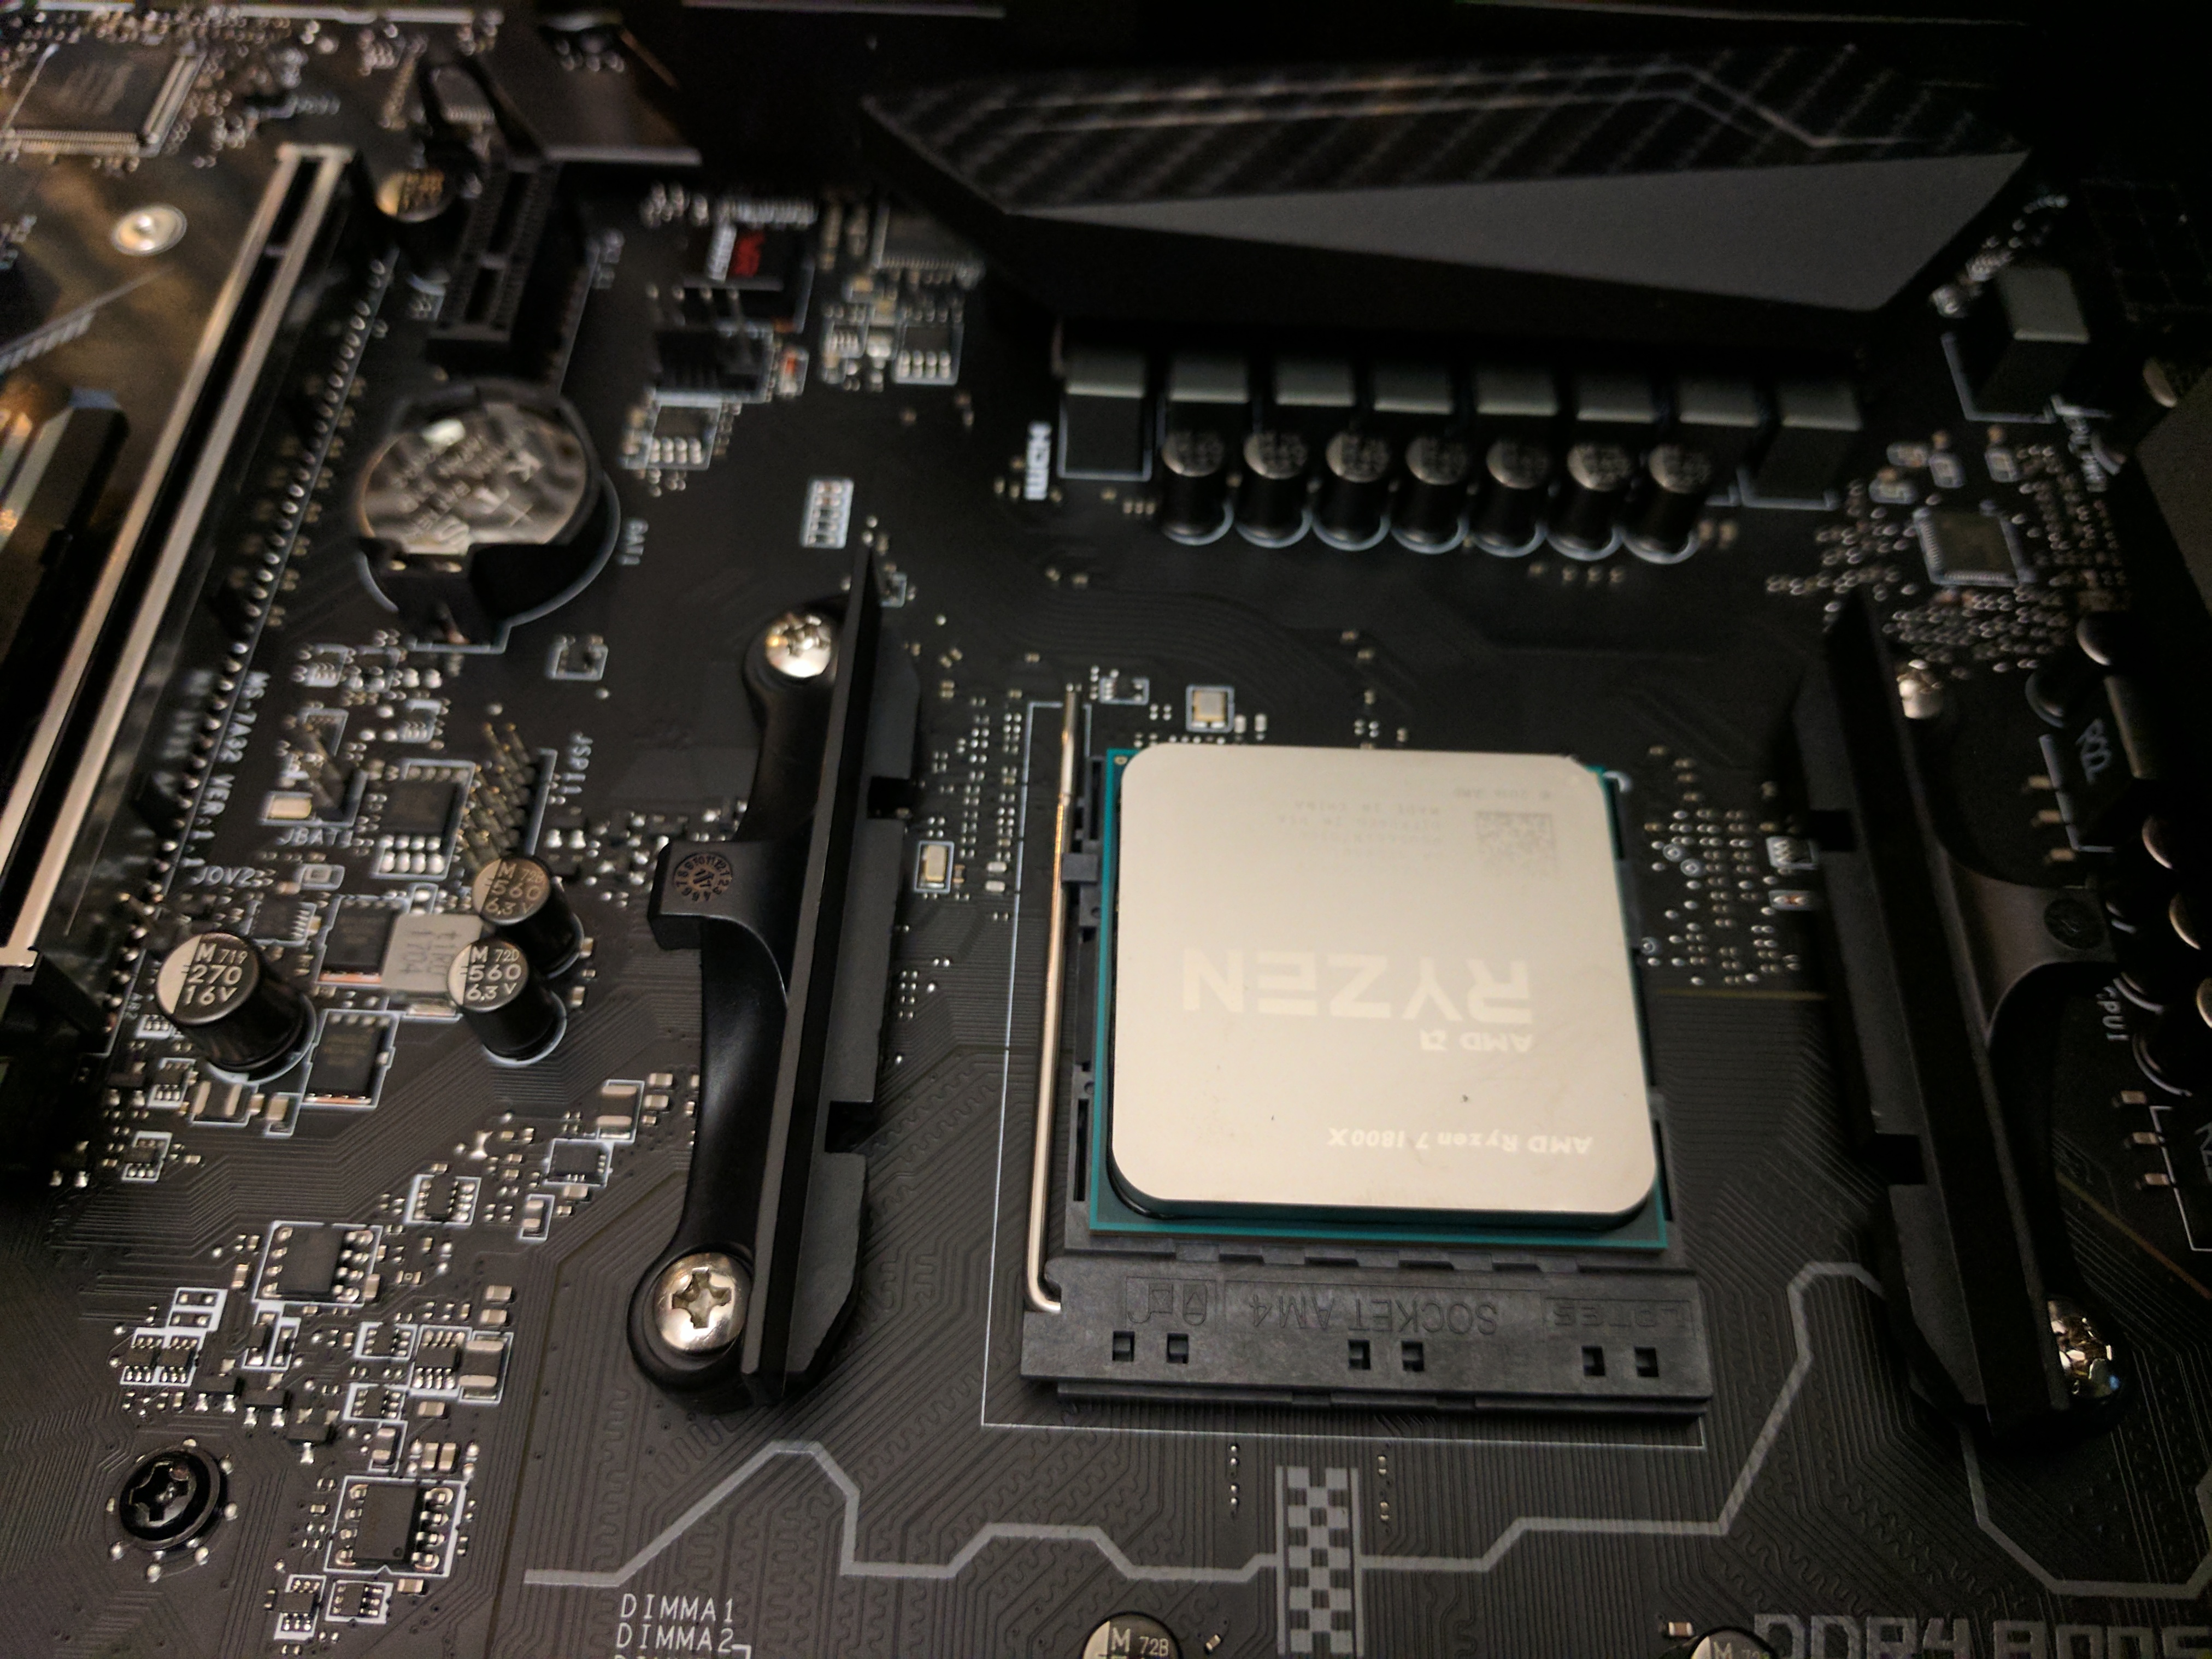 The new AMD Ryzen 7 1800x CPU taking its place.